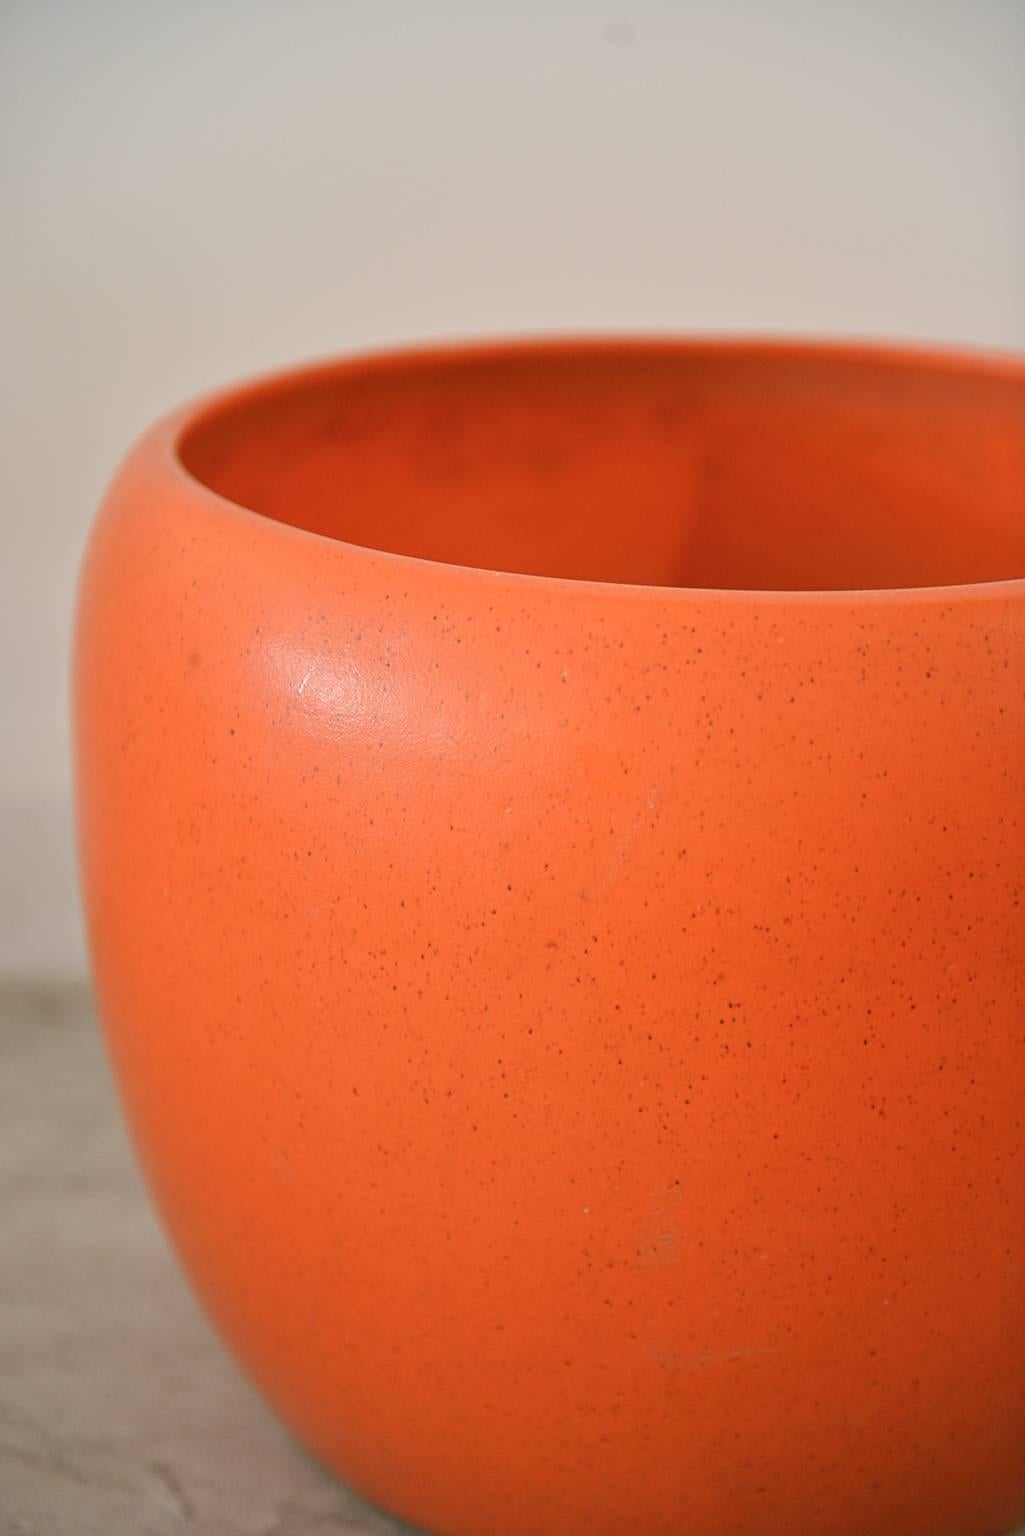 Large, rare model JS-12 orange speckle planter by Gainey Ceramics of Laverne, CA. Excellent original condition, no chips or cracks, has drainage holes in bottom. California Modernism at its best.

Measures: 12